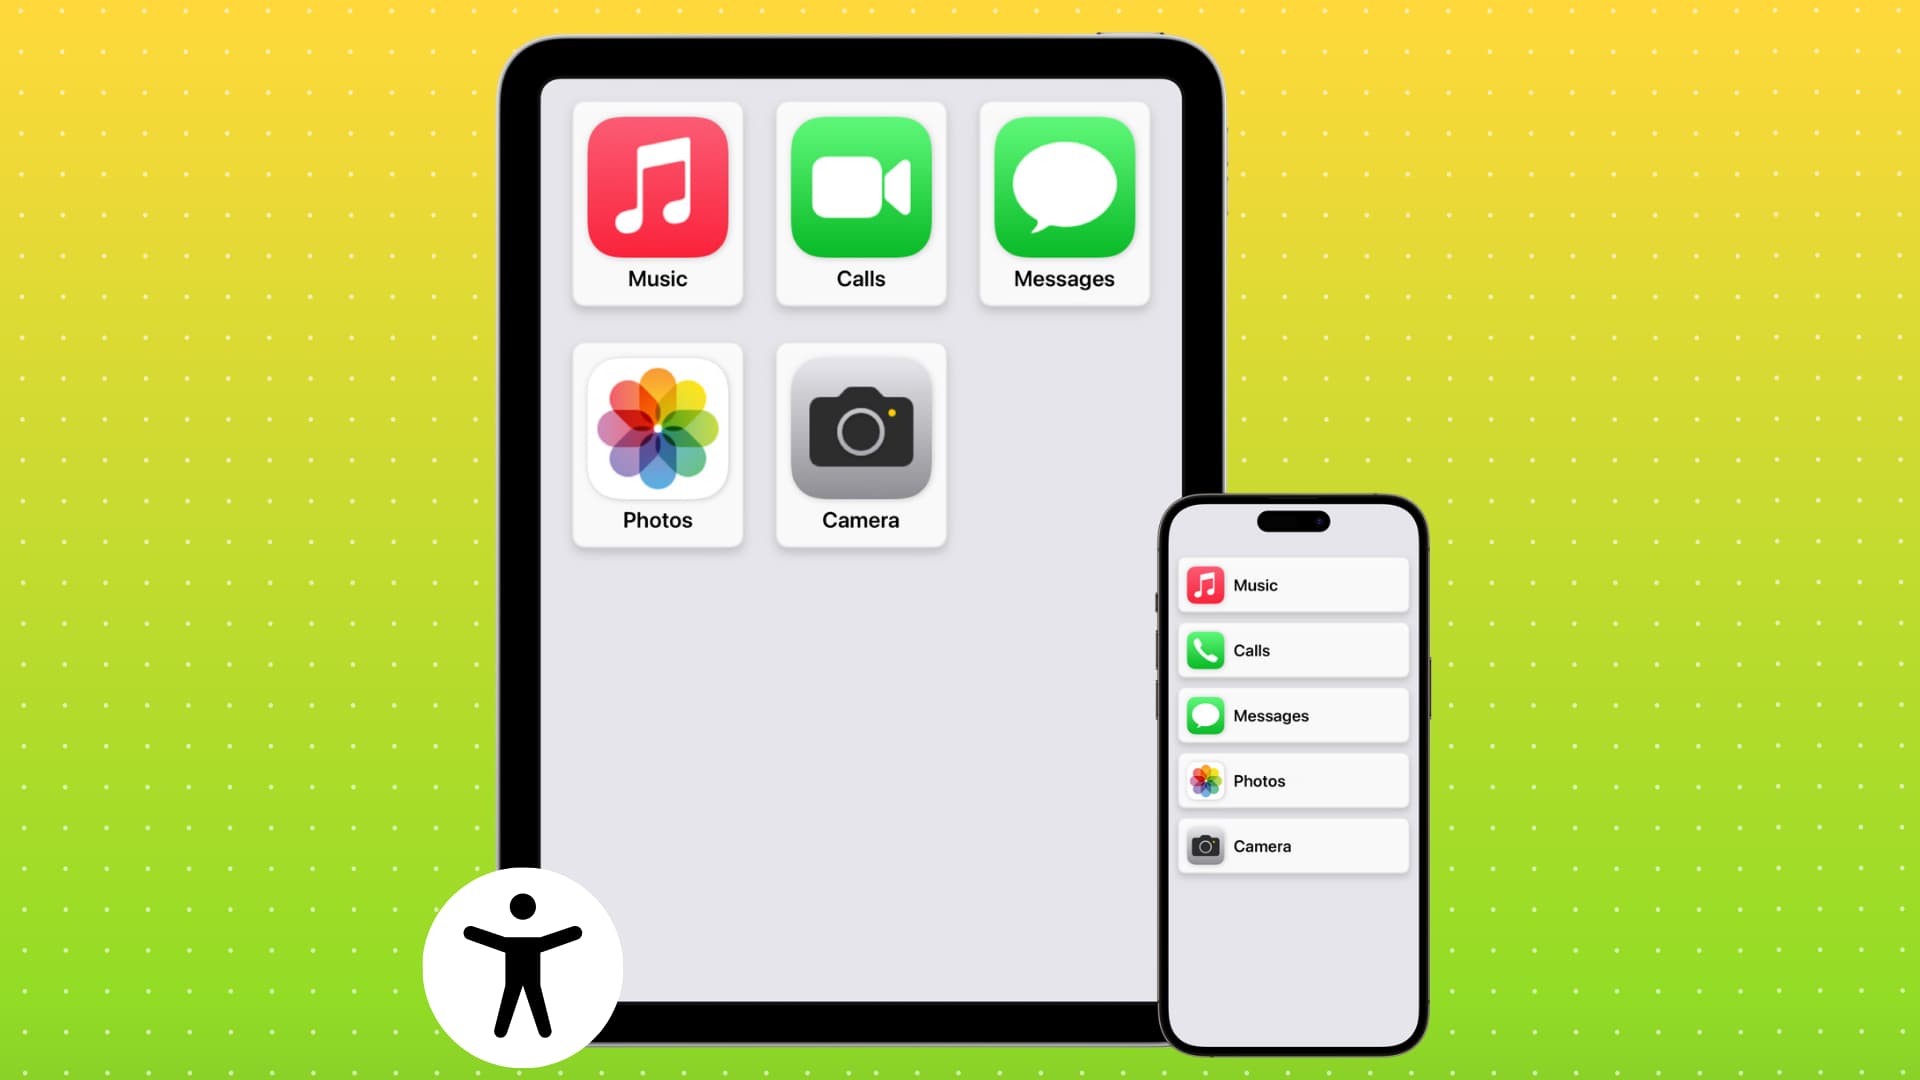 Assistive Access screen on iPhone and iPad